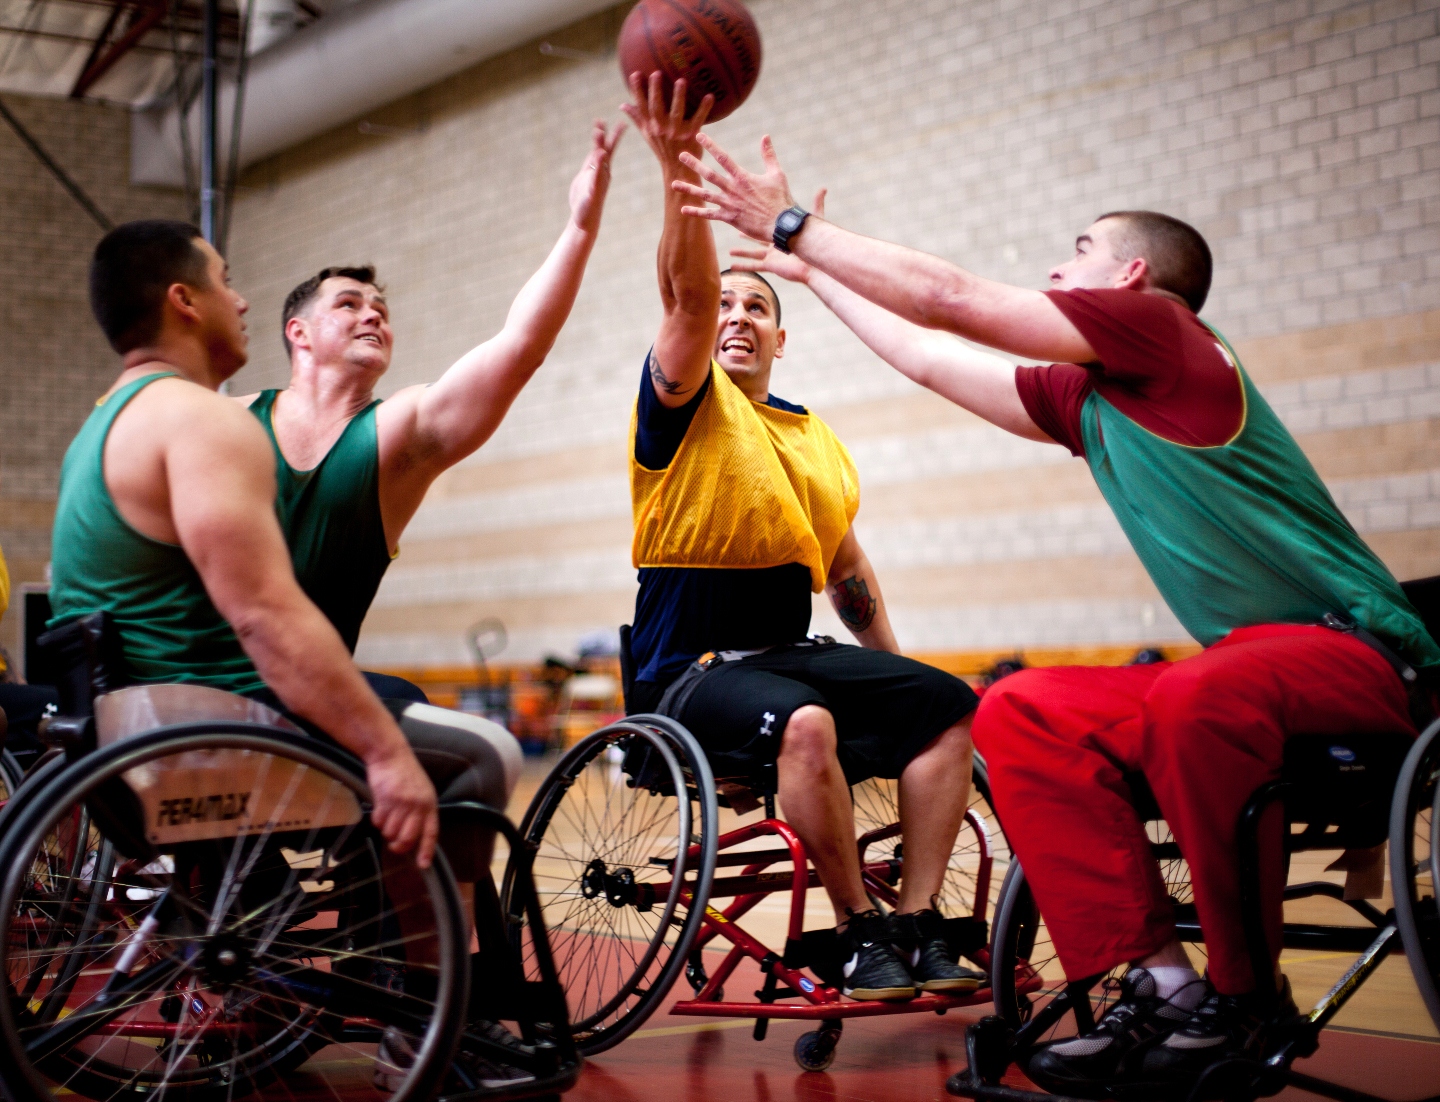 Four athletes in wheelchairs reaching for a basketball